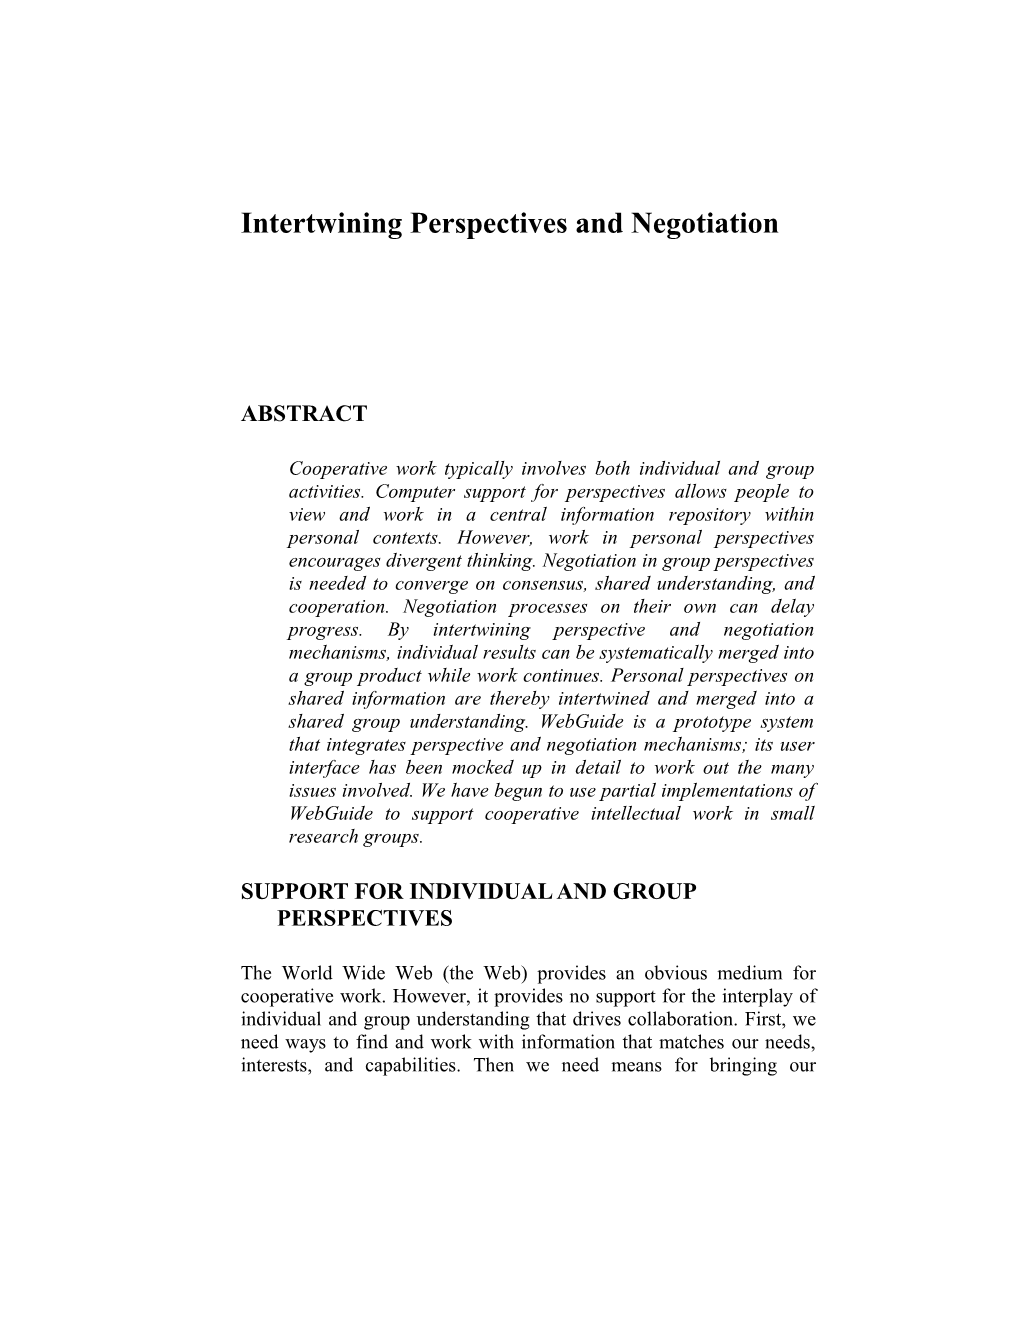 Intertwining Perspectives and Negotiation